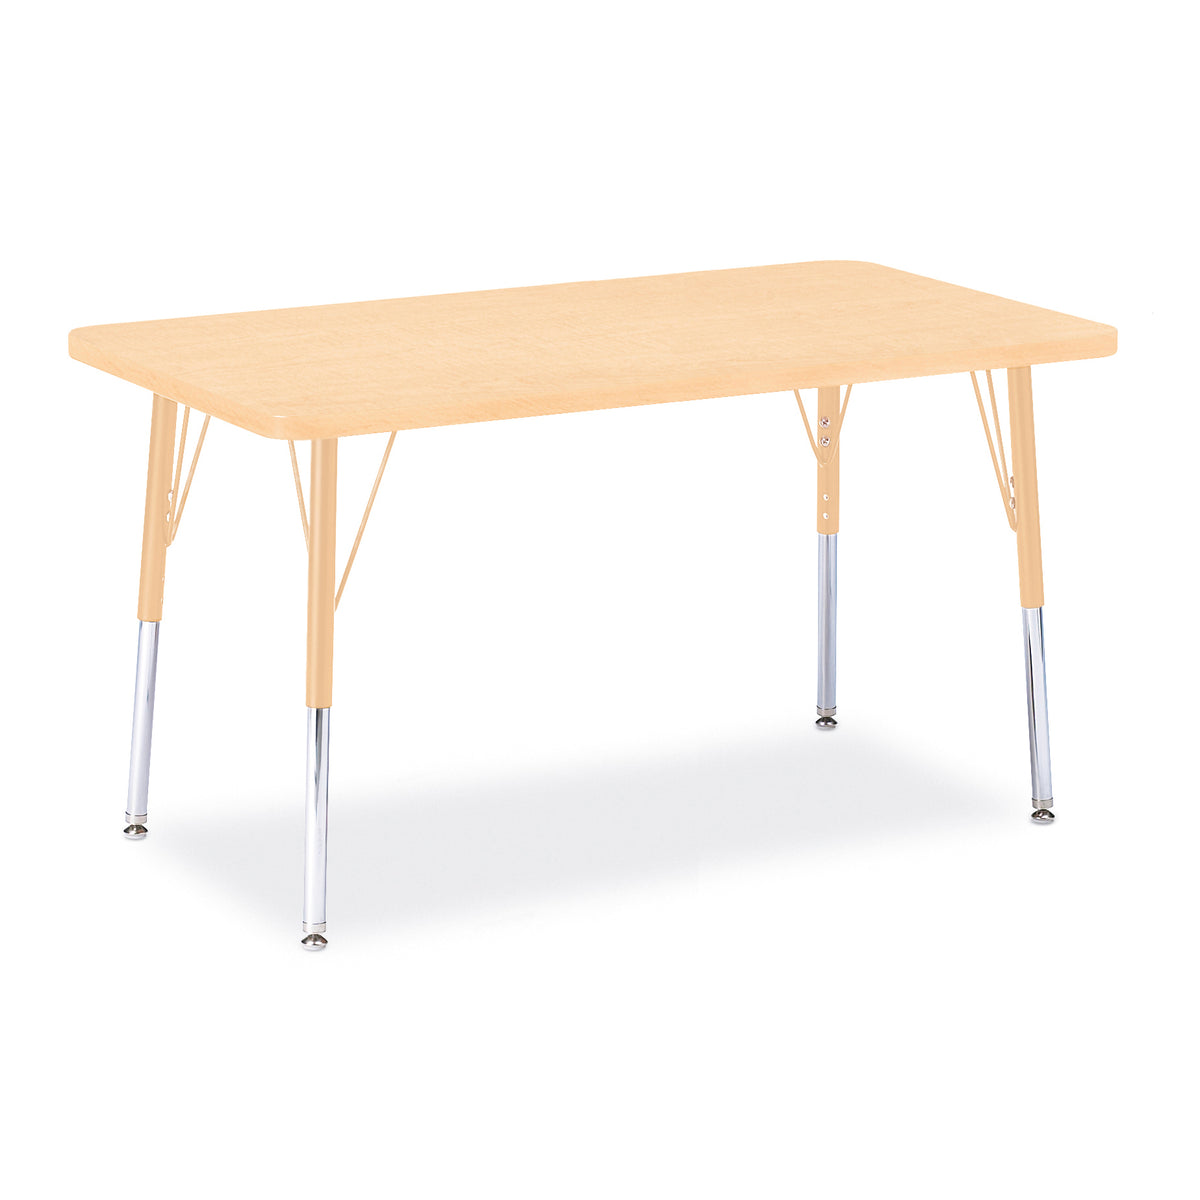 6478JCA251, Berries Rectangle Activity Table - 24" X 36", A-height - Maple/Maple/Camel